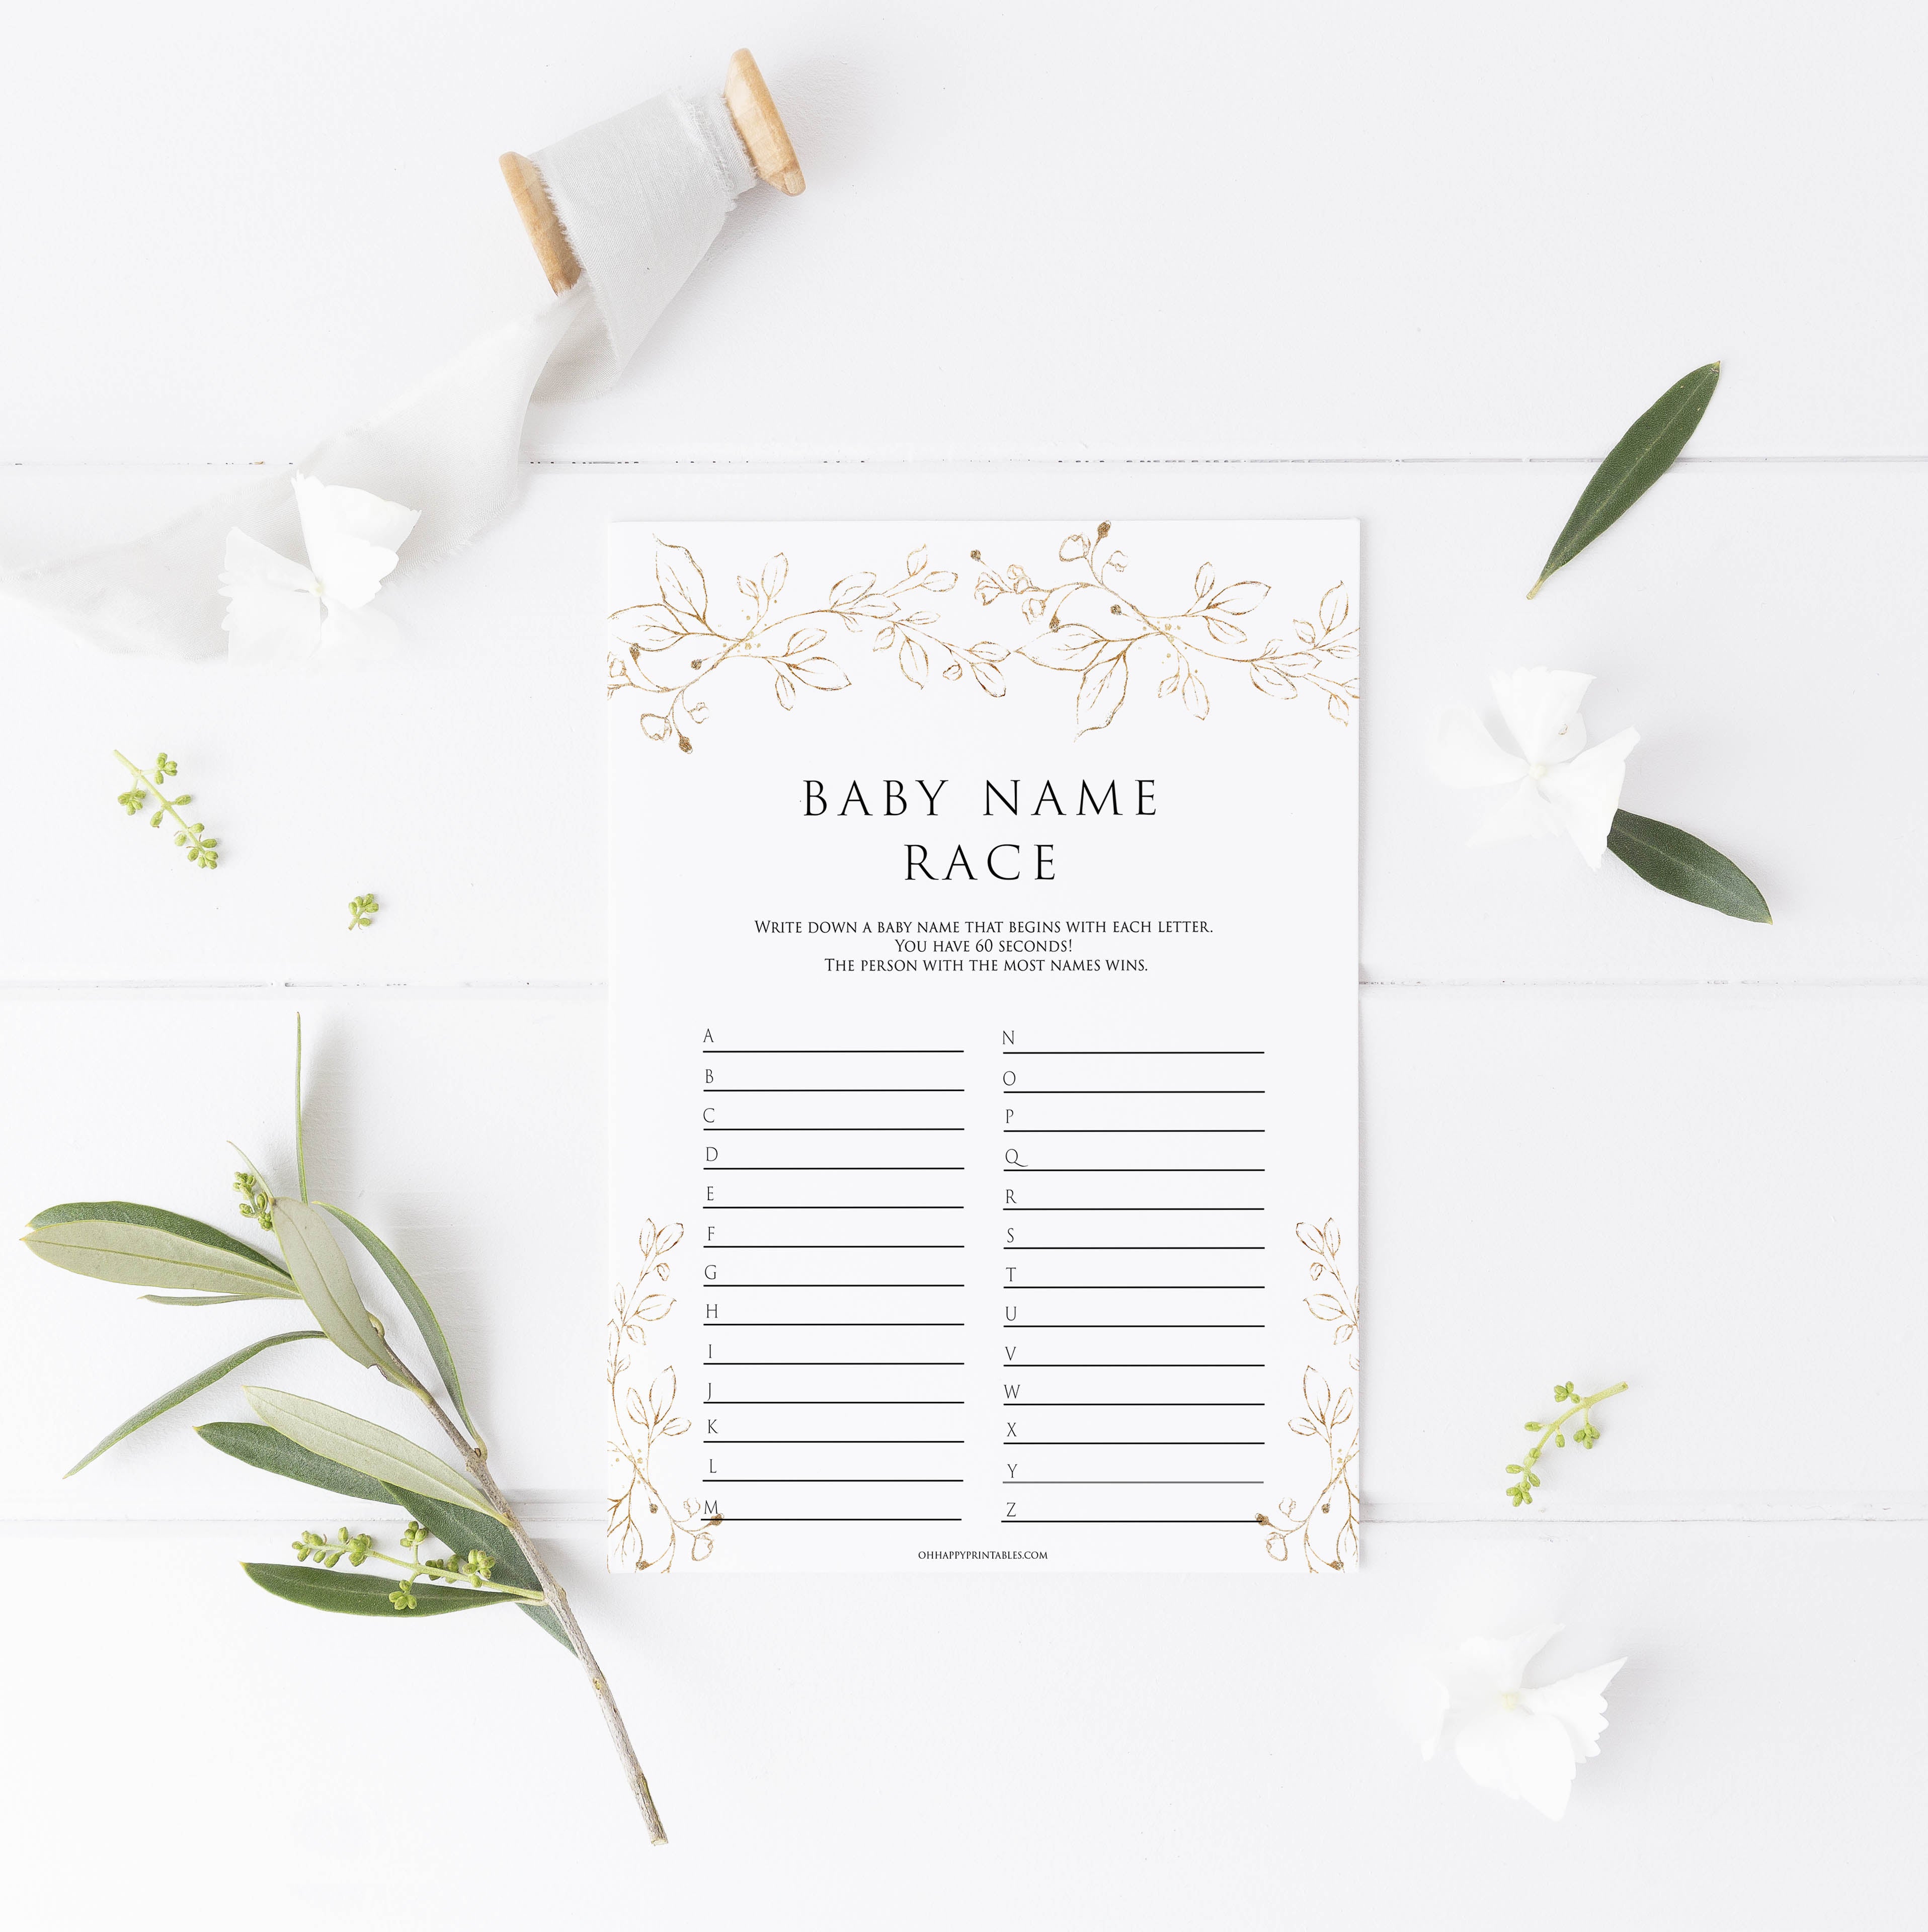 baby name race game, Printable baby shower games, gold leaf baby games, baby shower games, fun baby shower ideas, top baby shower ideas, gold leaf baby shower, baby shower games, fun gold leaf baby shower ideas